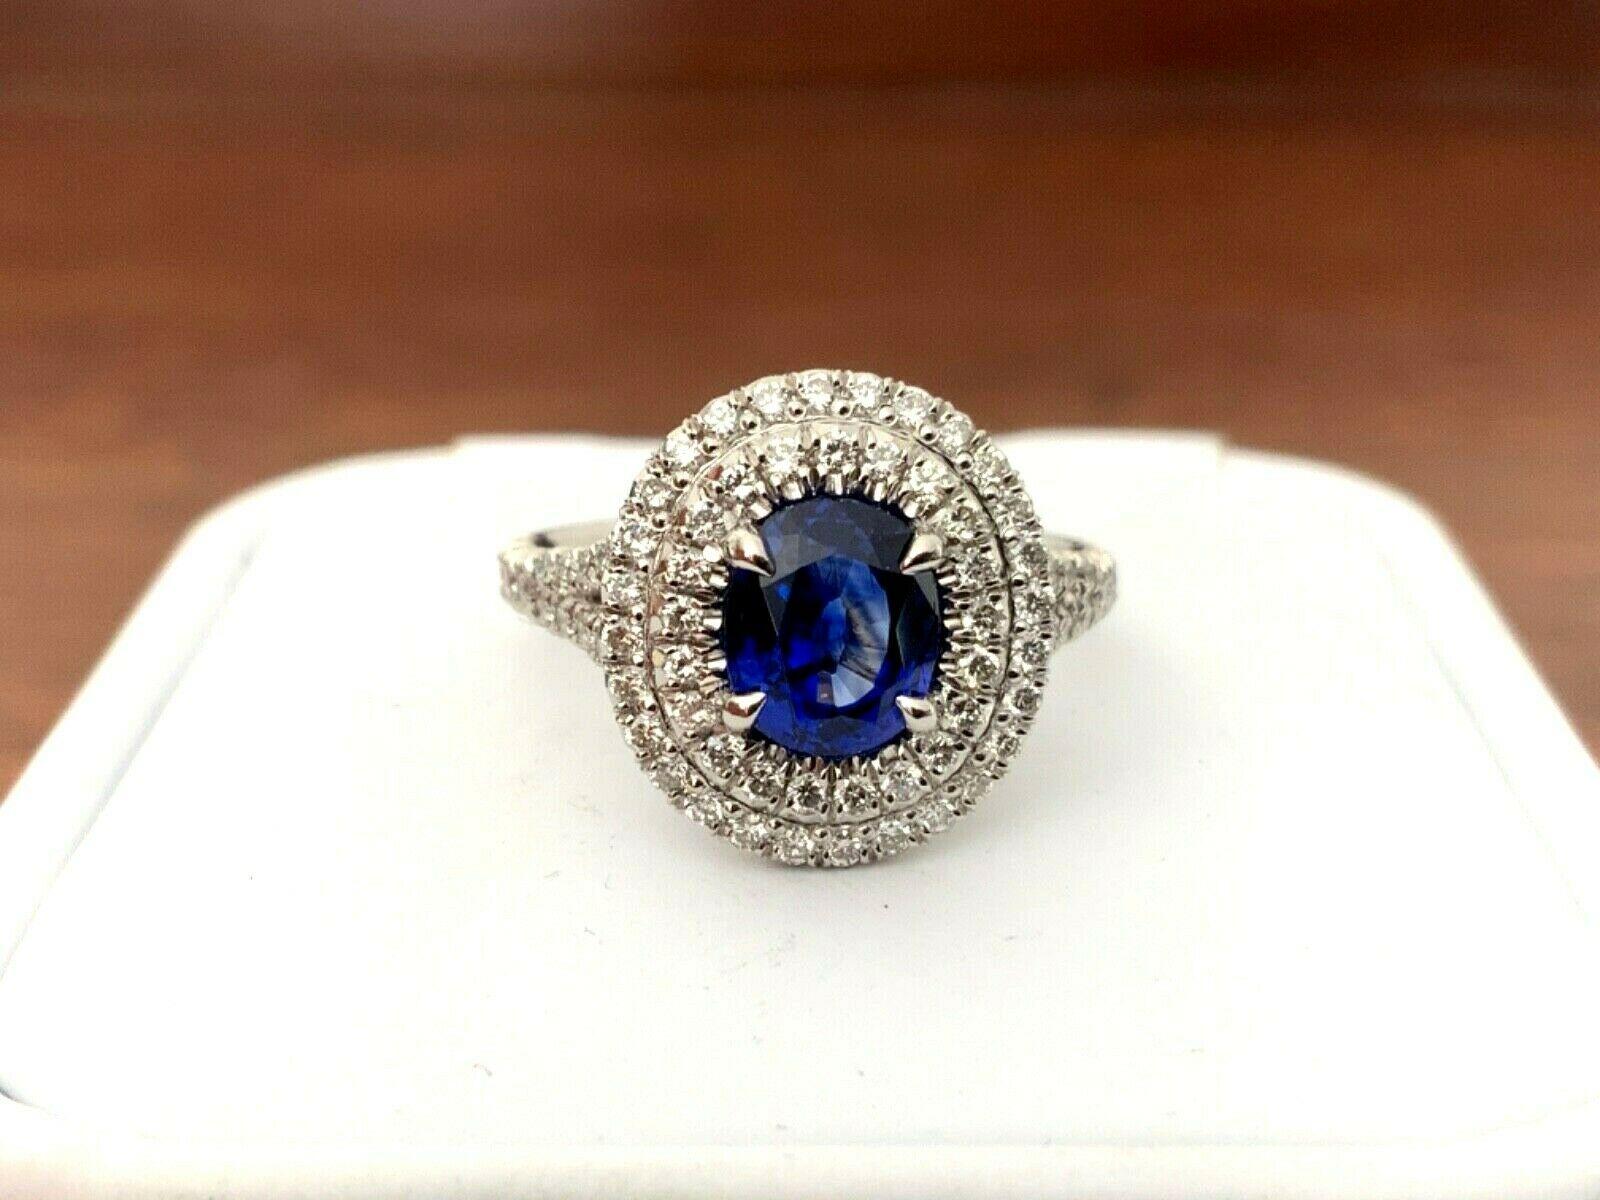 Women's 1.65 Carat Natural Royal Blue Madagascar Sapphire and Diamond Ring GIA Certified For Sale